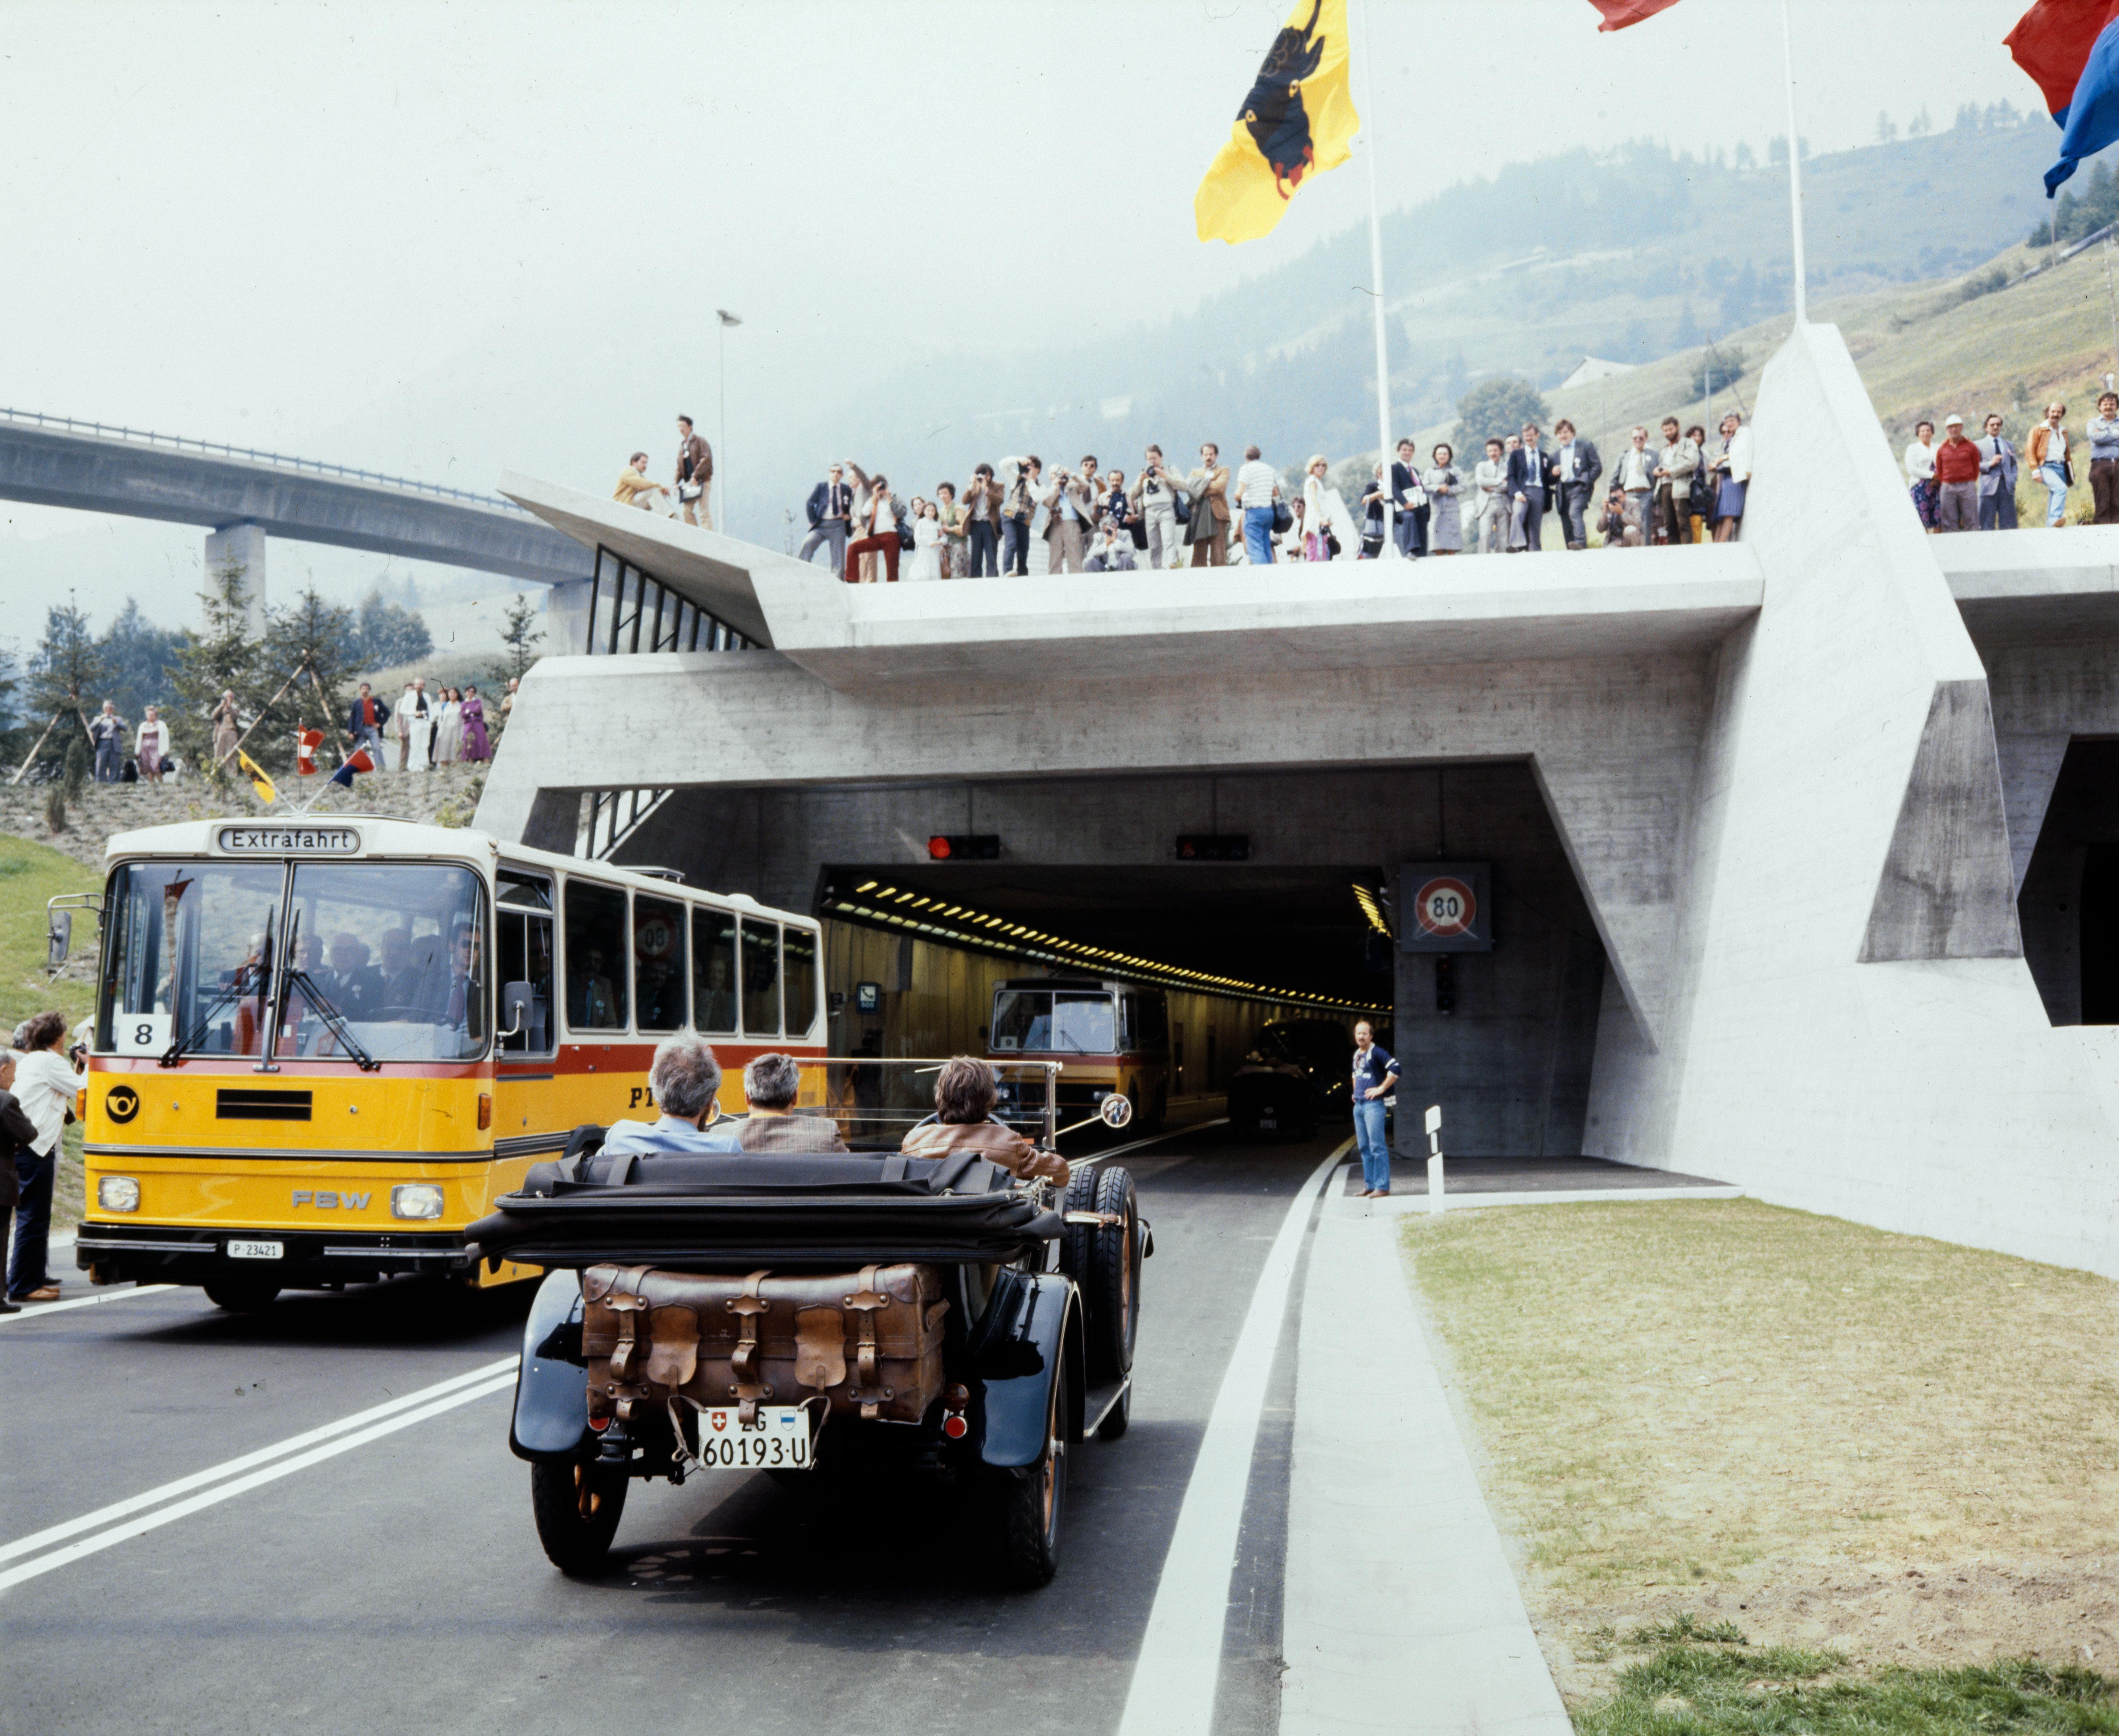 On September 5, 1980, when the Gotthard road tunnel was inaugurated, we looked back at an engineering masterpiece that took 10 years of construction and 20 years of planning. The tunnel project was Giovanni Lombardi's.